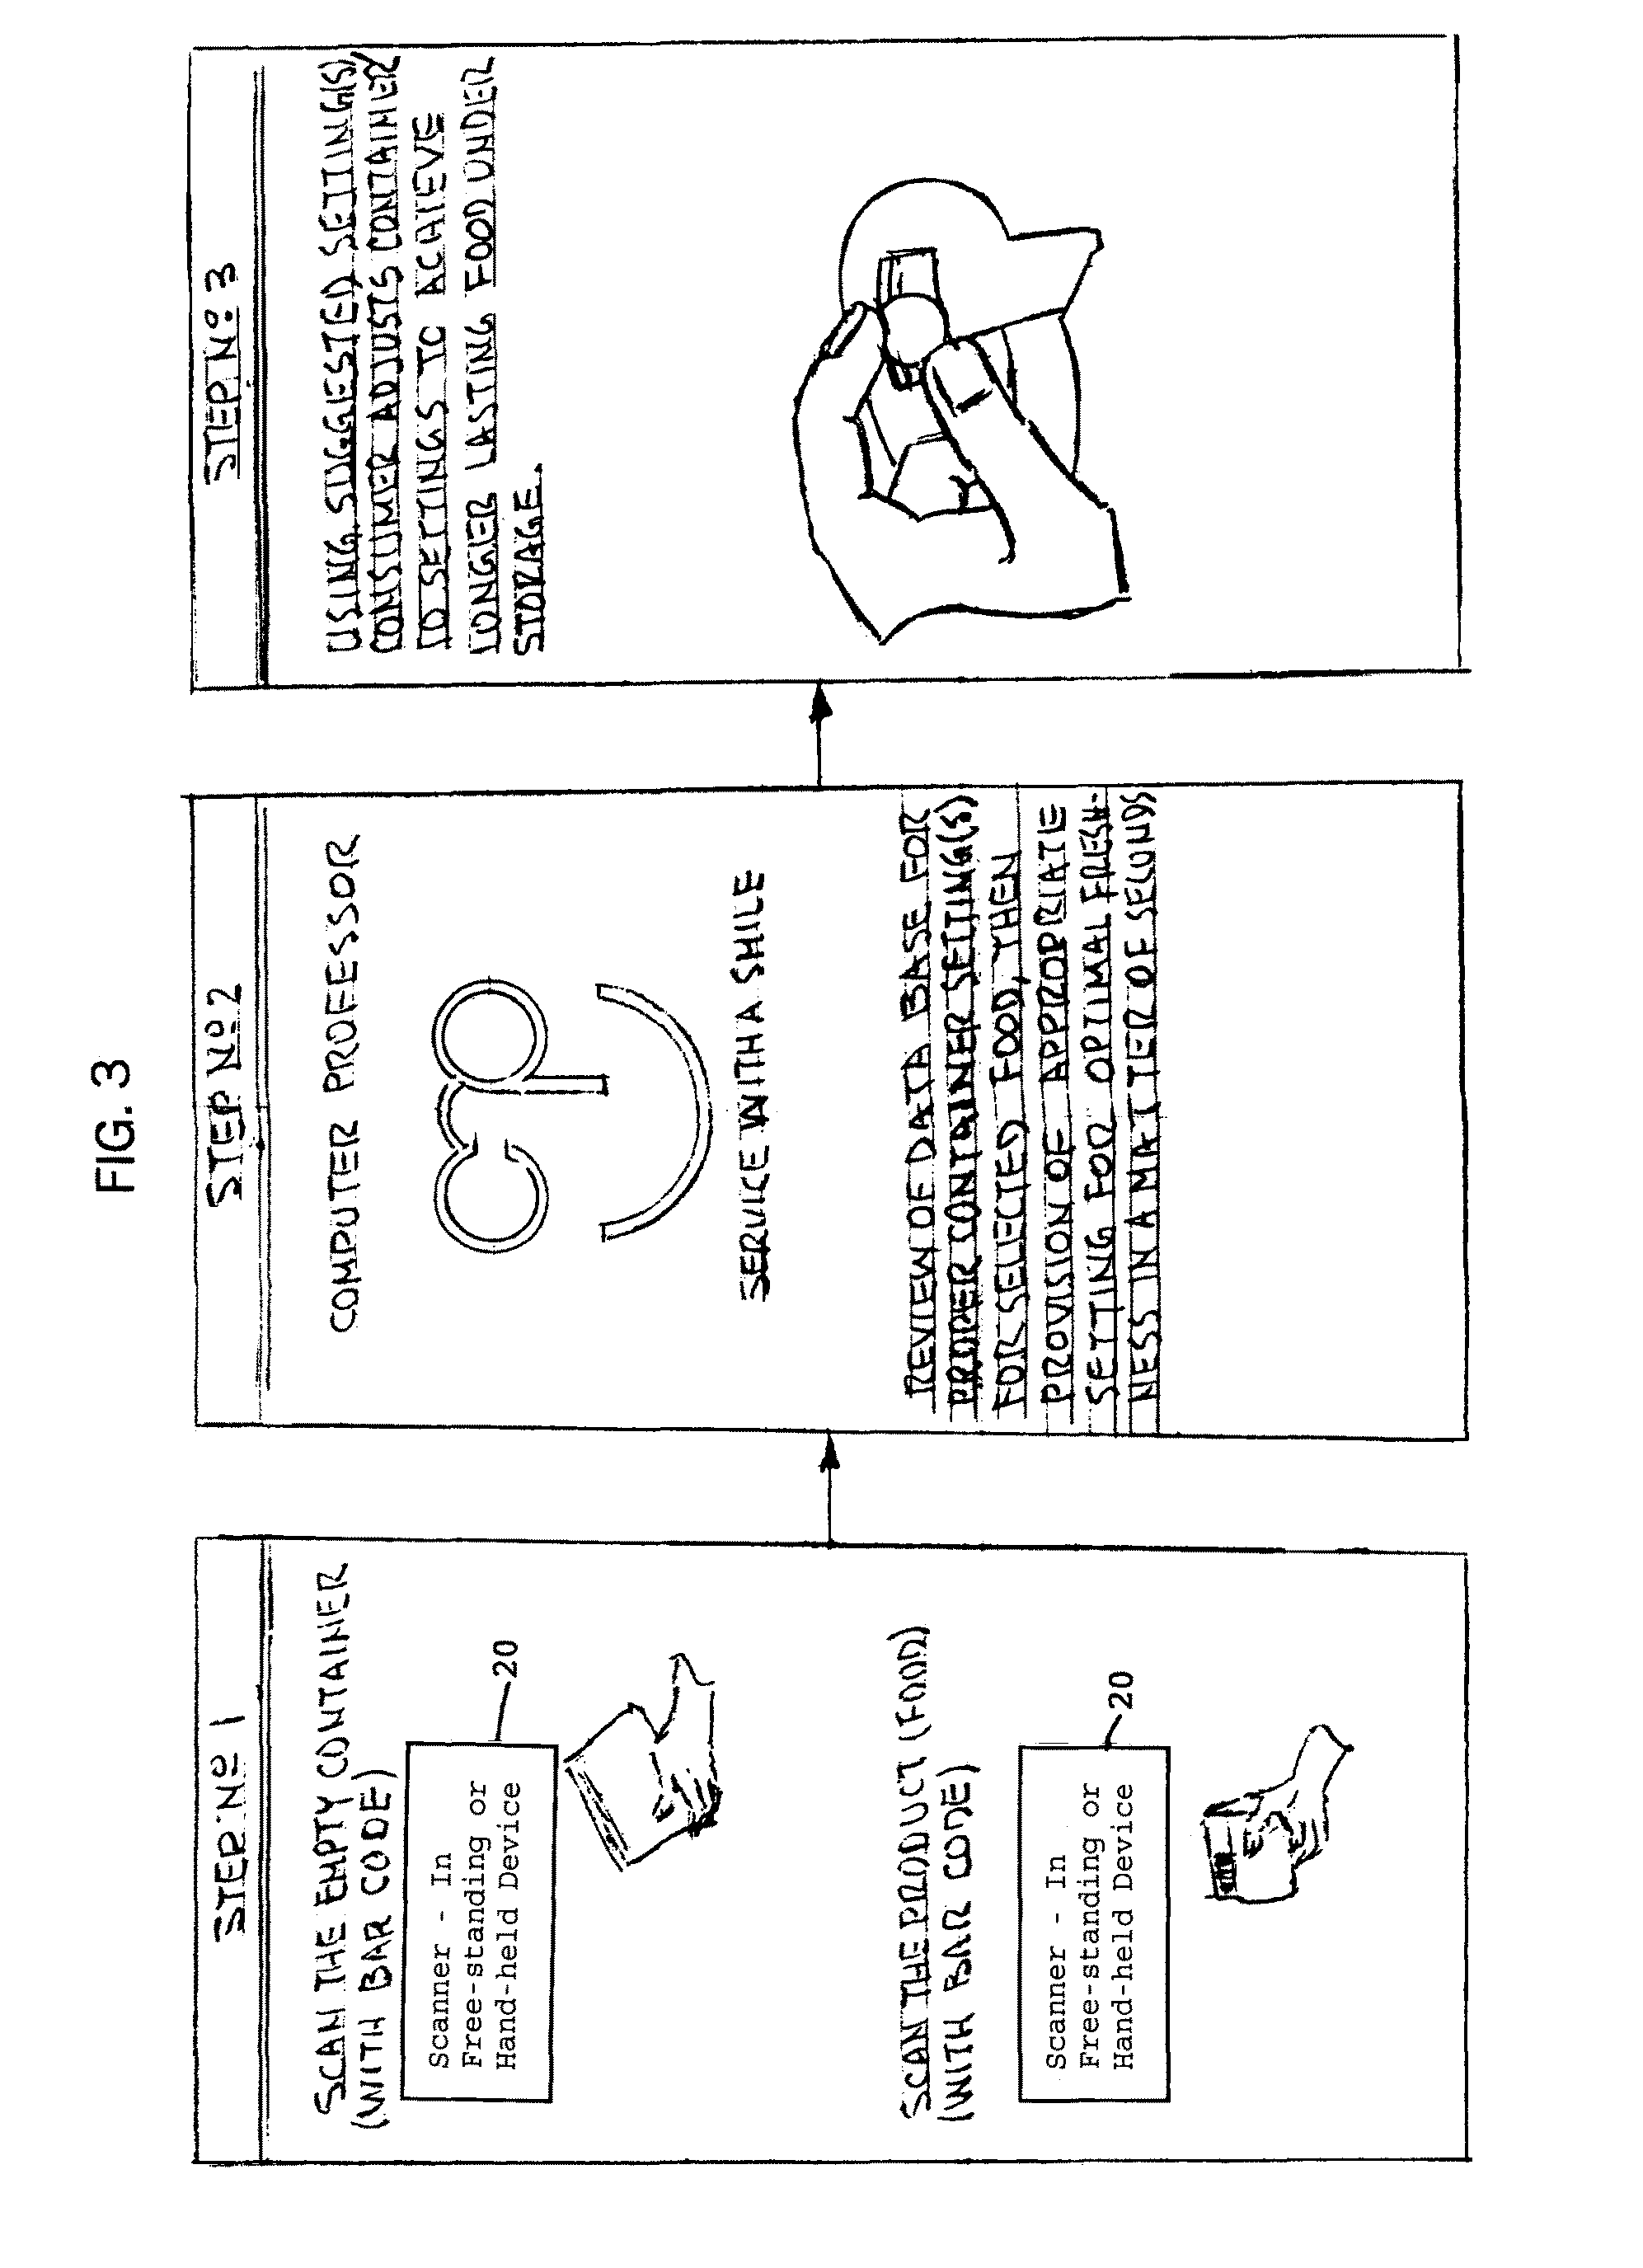 Method for computer evaluation of containers and food to obtain optimum storage and/or use